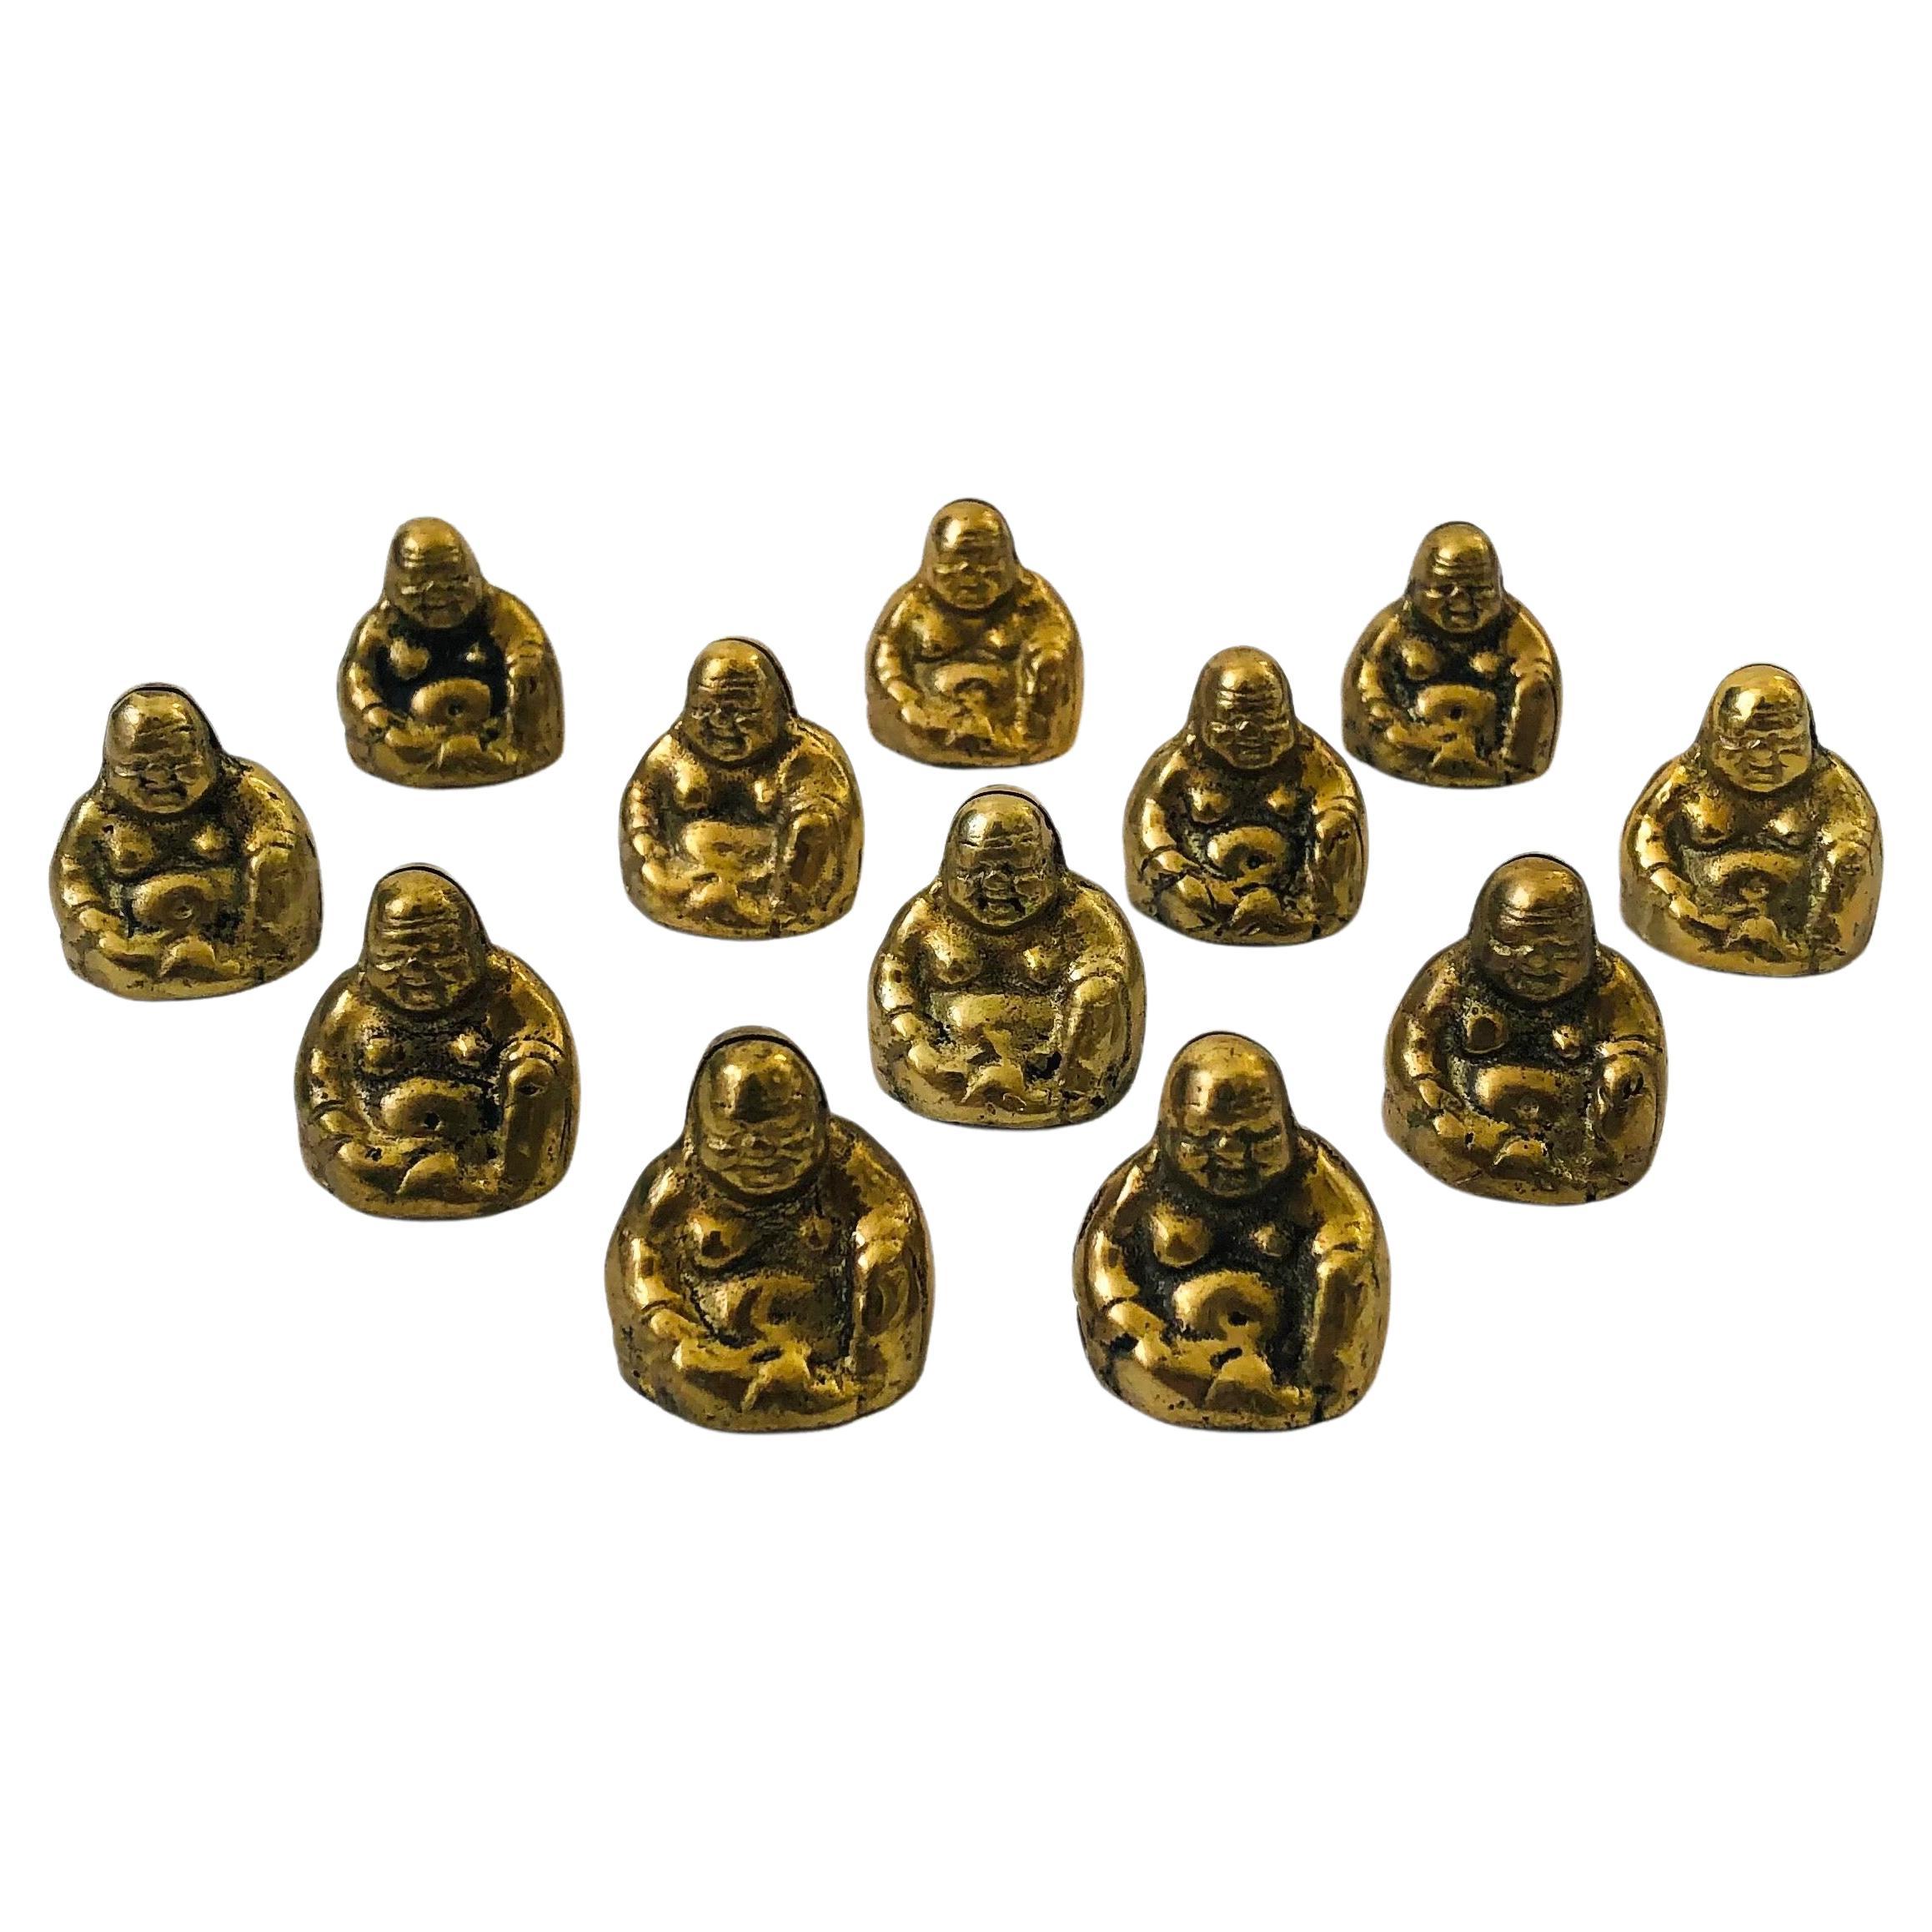 Vintage Brass Buddha Place Card Holders, Set of 12